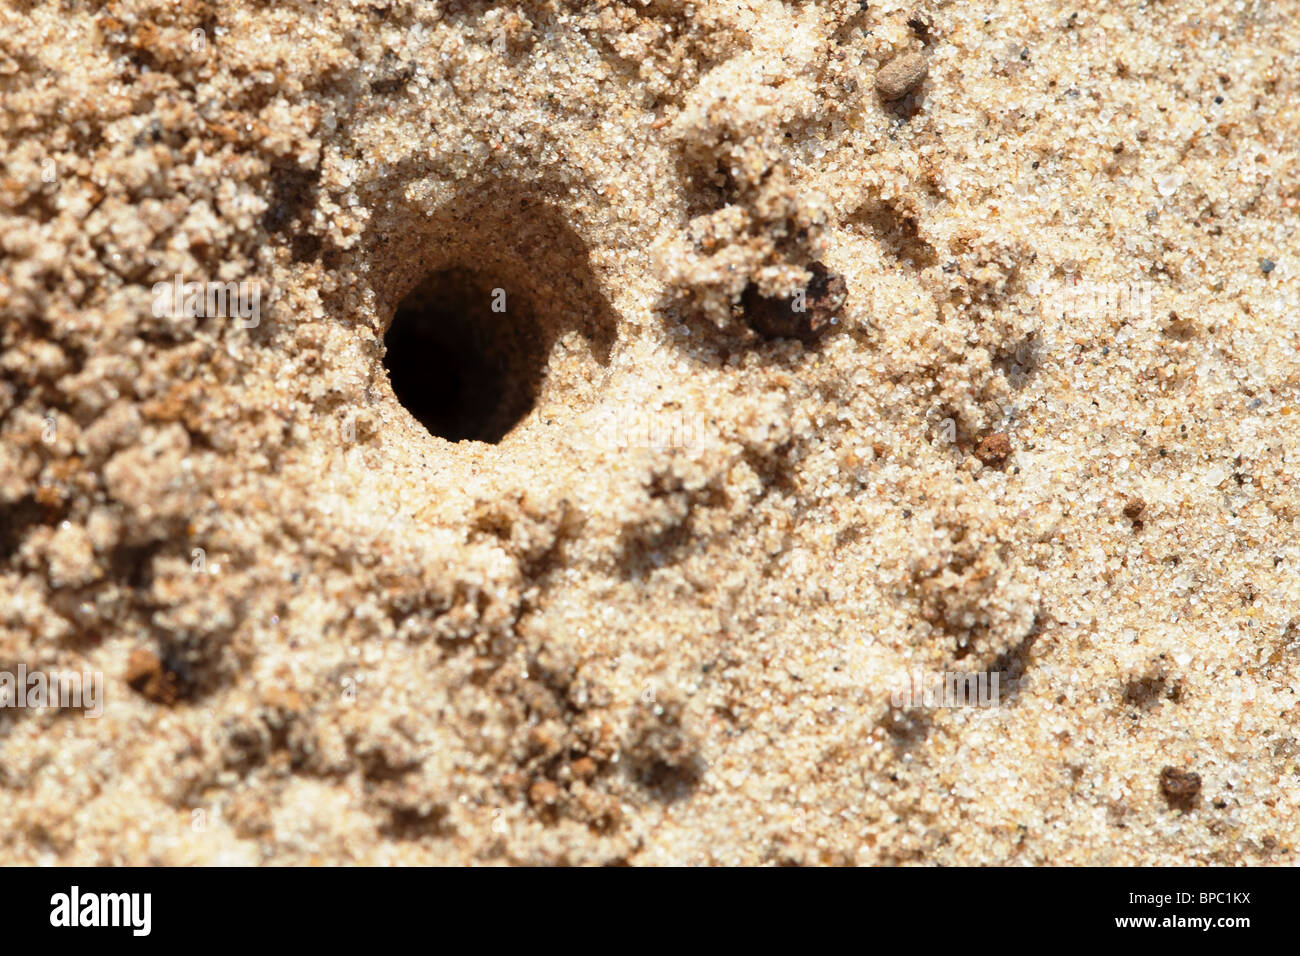 Small hole made in a ground a predatory wasp Stock Photo